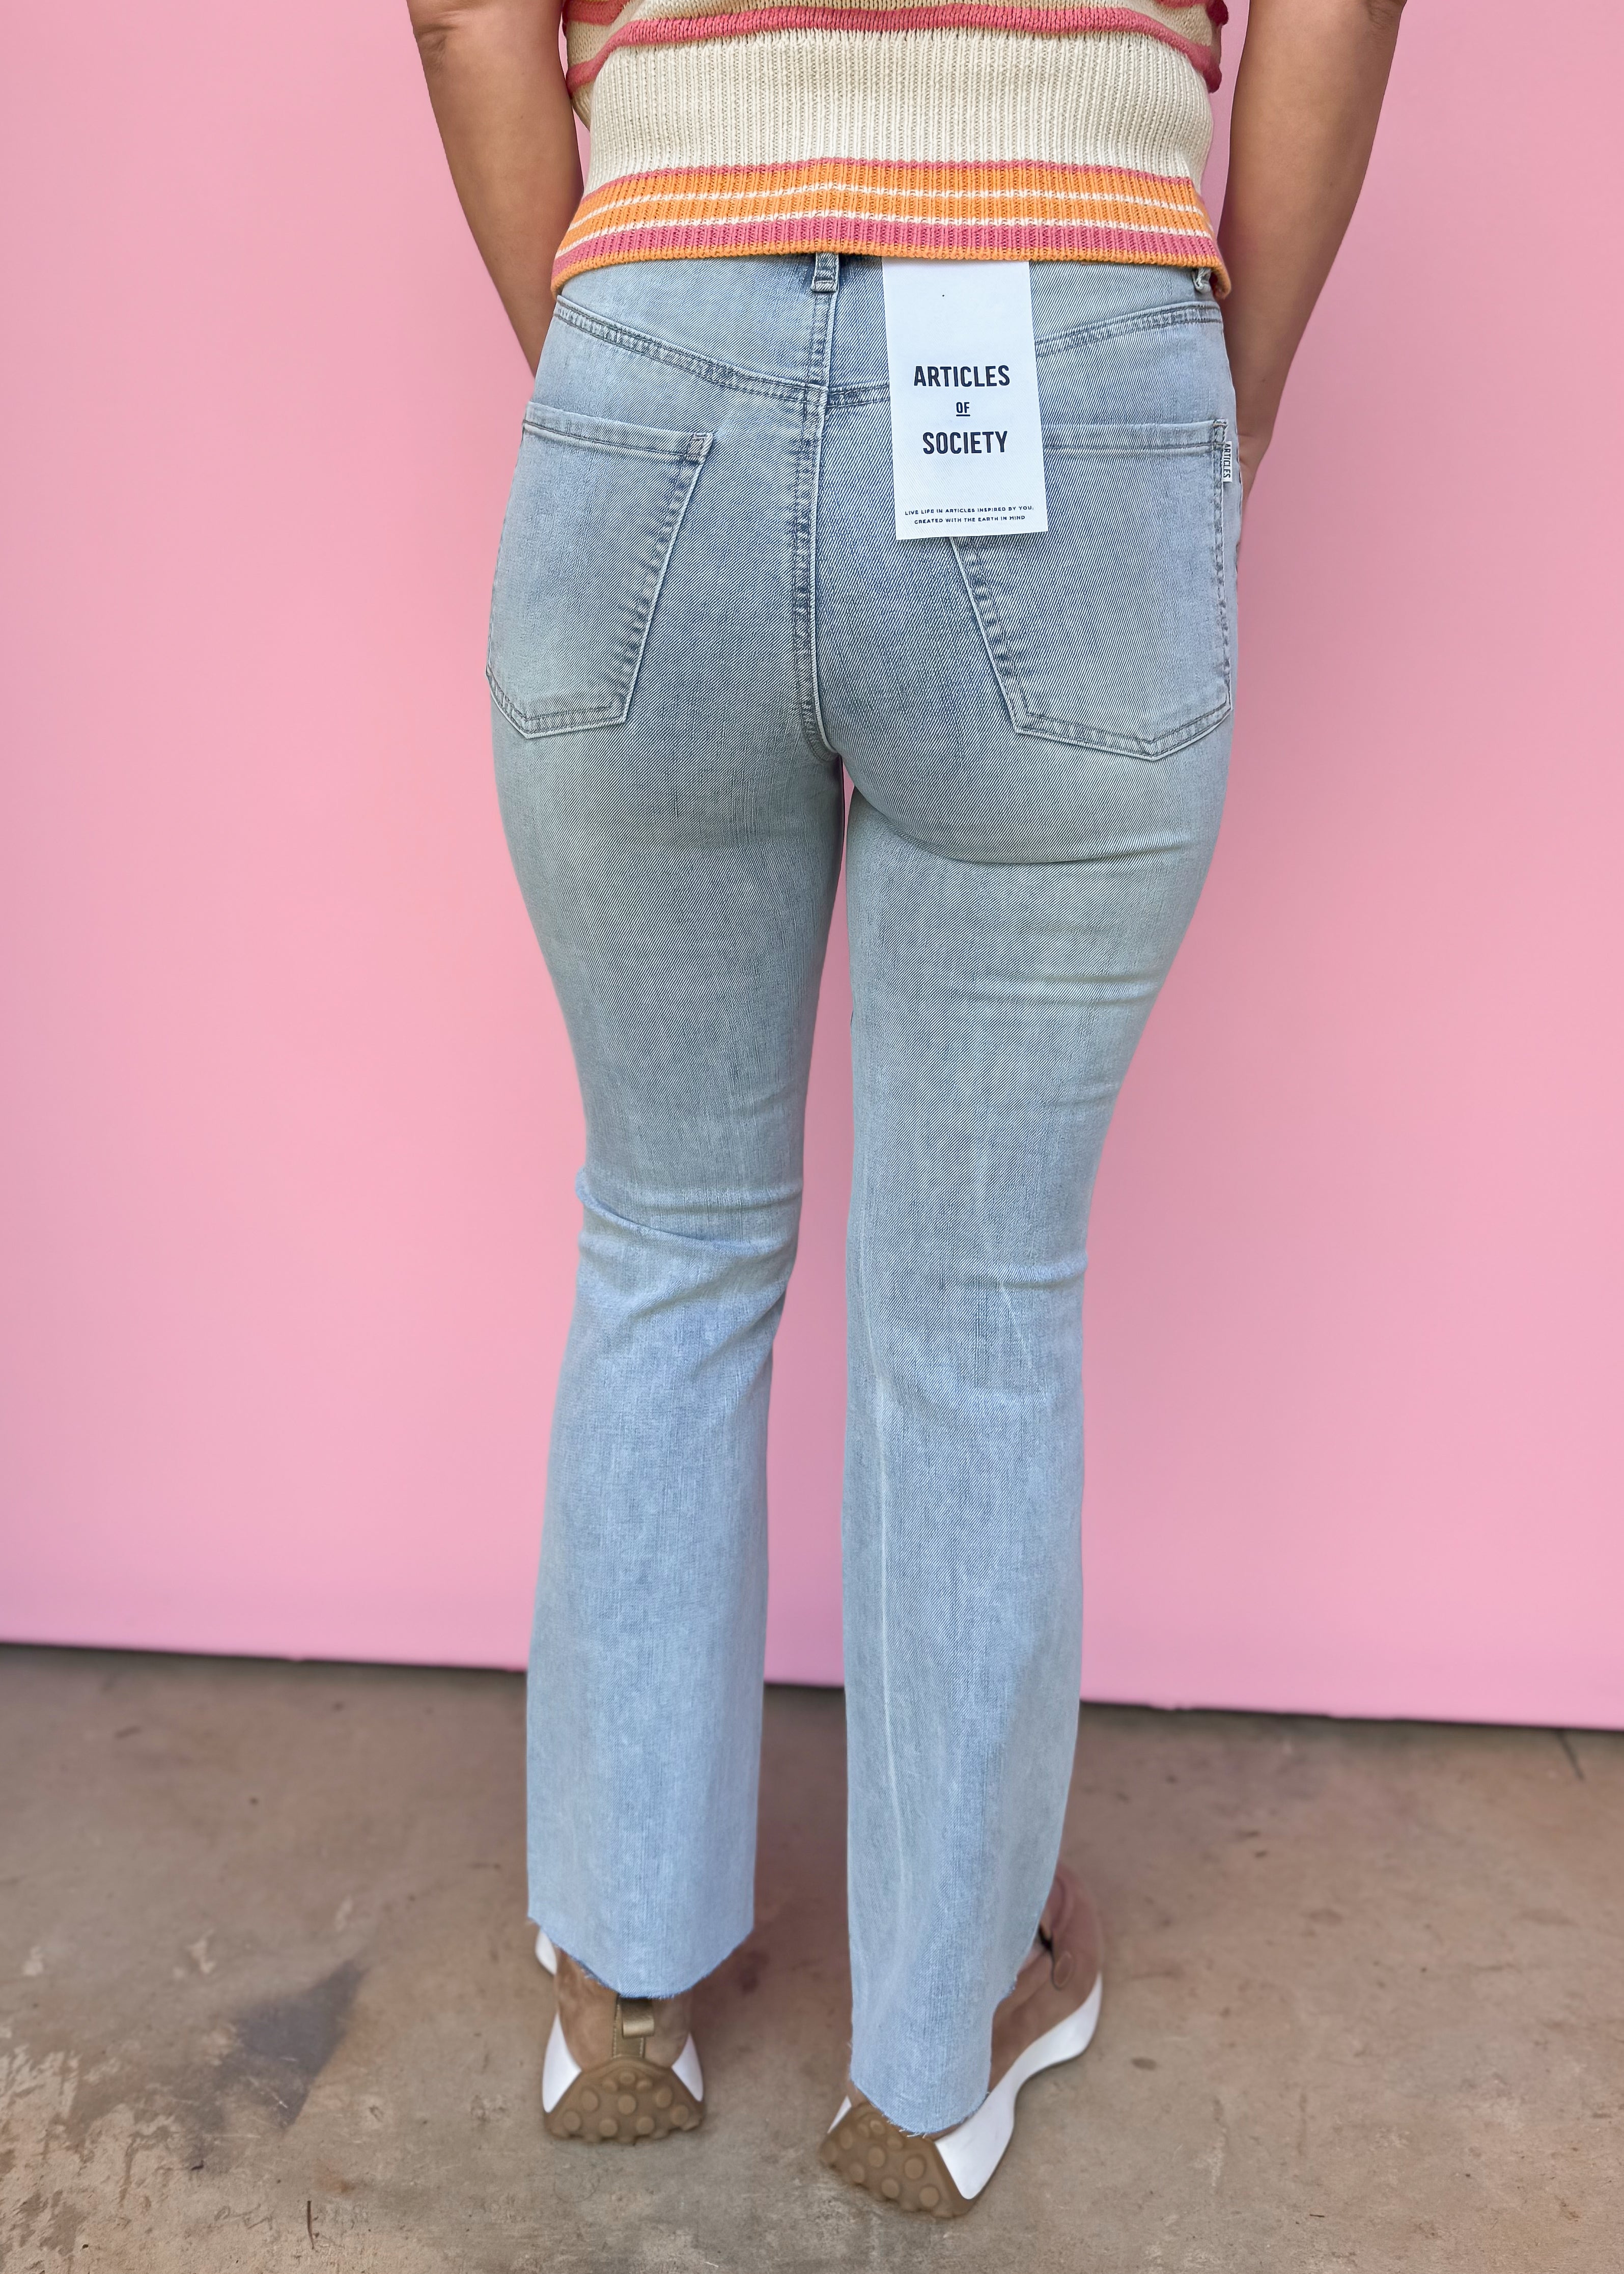 Articles of Society: Linden Jeans